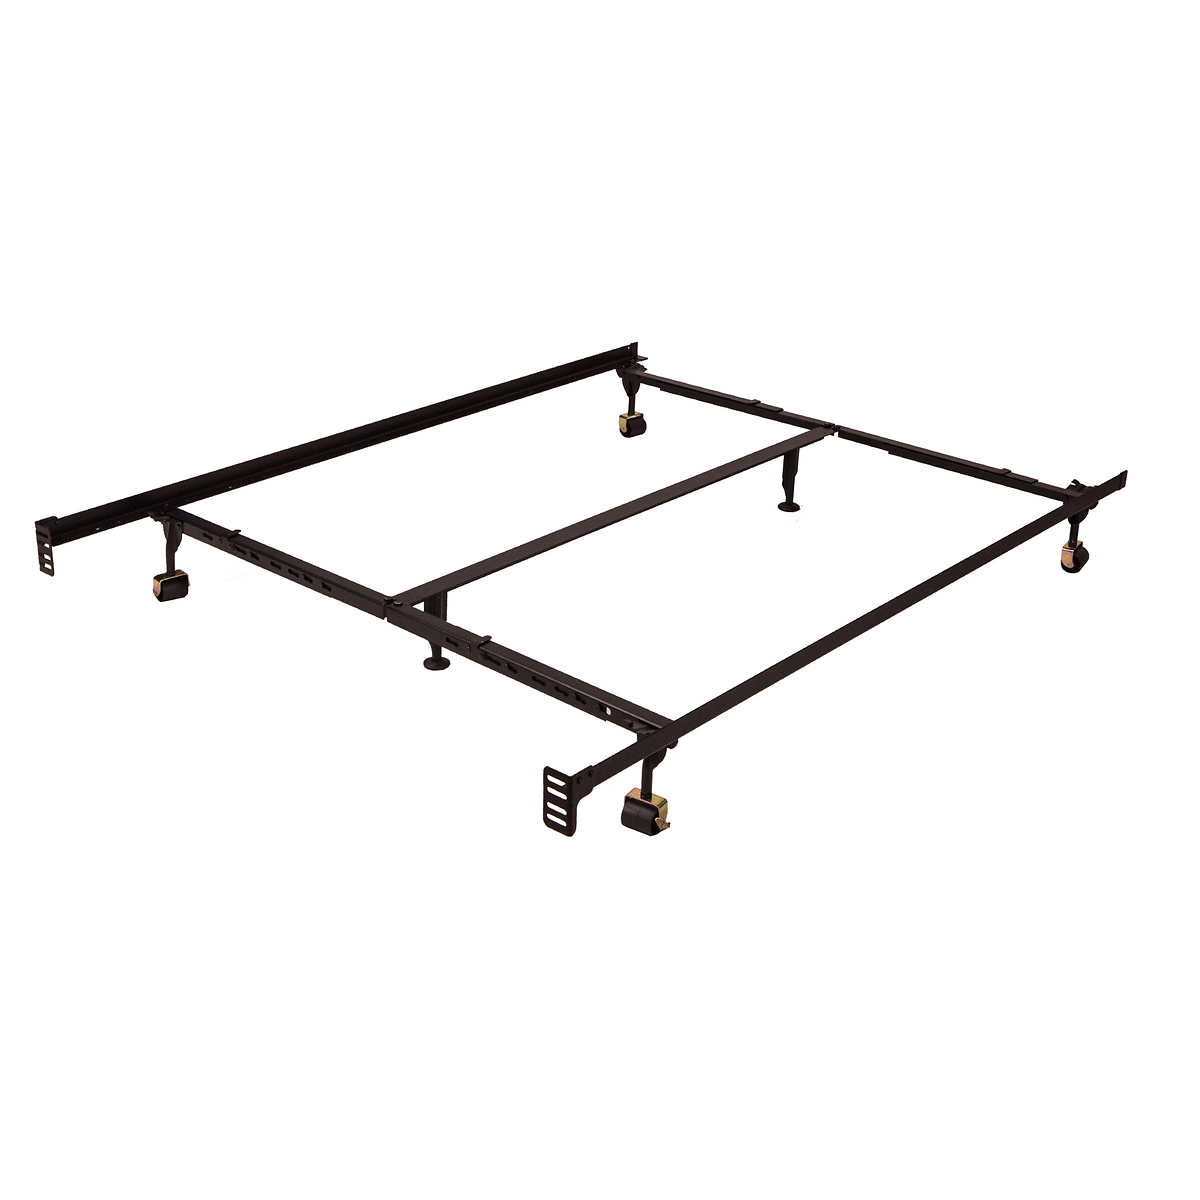 Premium Universal Lev R Lock Bed Frame, Queen Universal Heavy Duty Metal Bed Frame